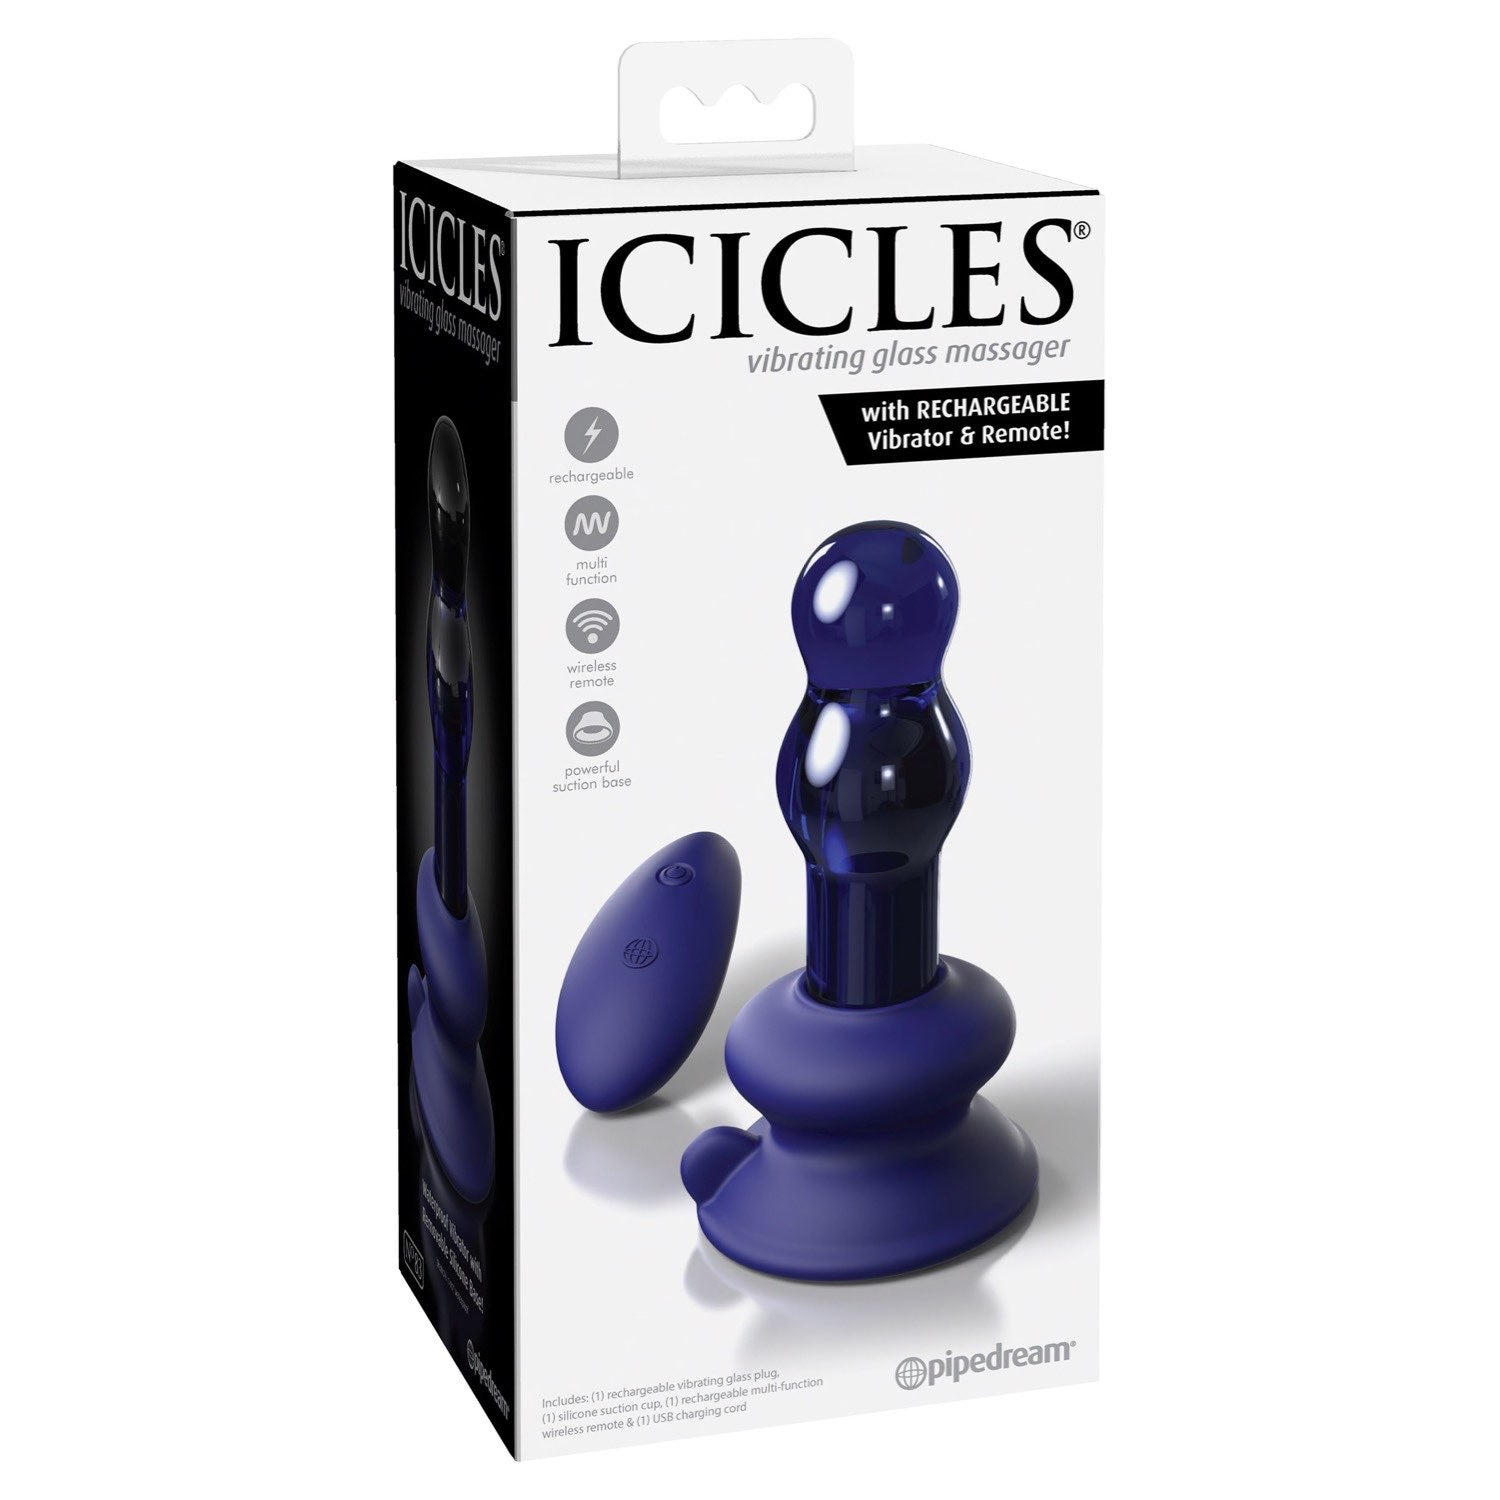 Icicles No. 83 - Blue Glass USB Rechargeable Vibrating Butt Plug with Remote by Pipedream